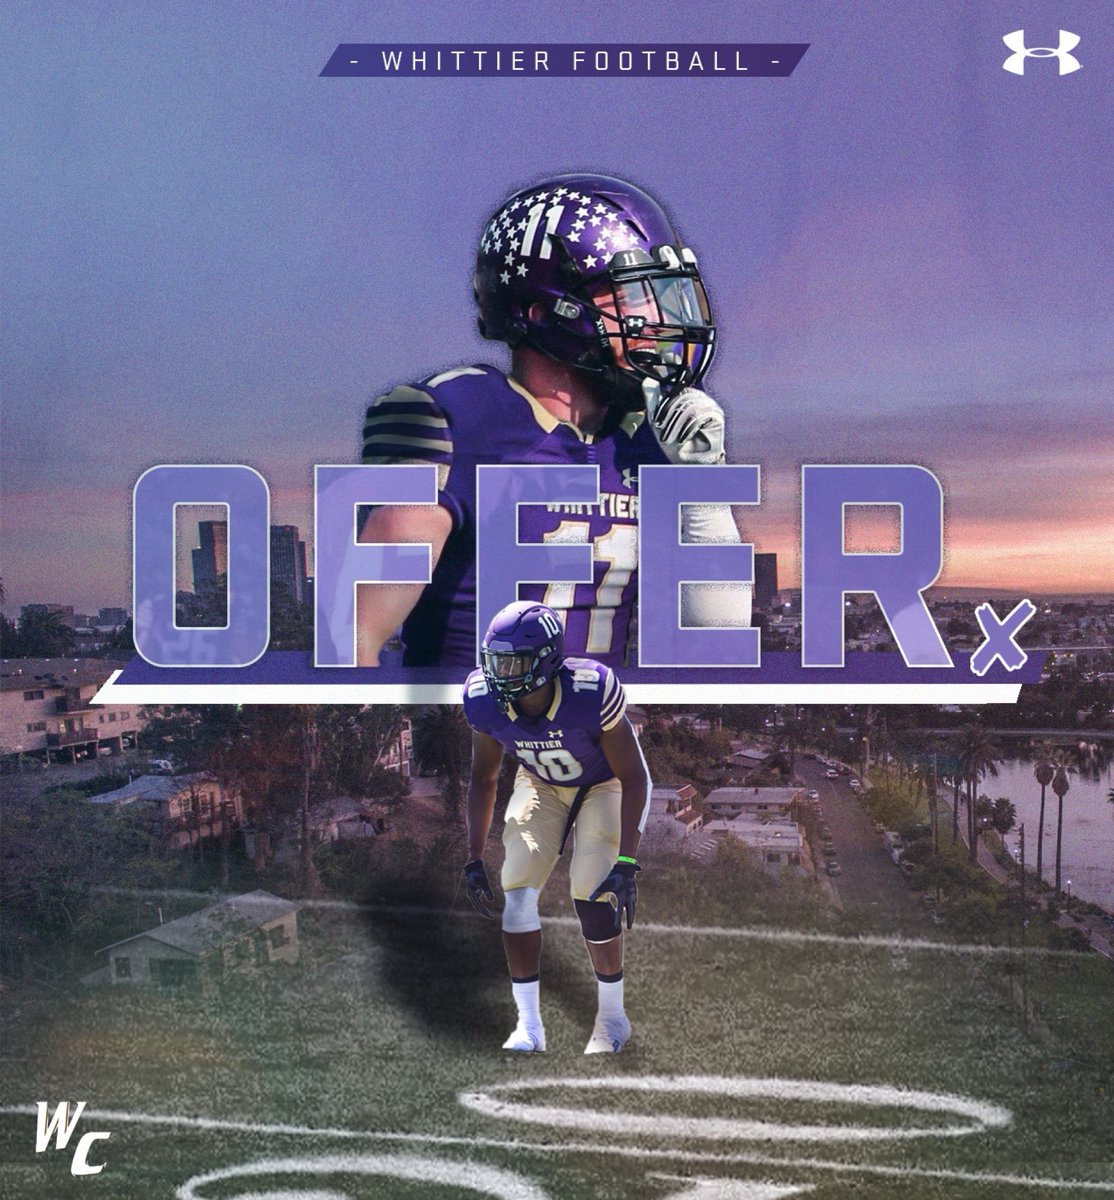 Excited to say that after speaking with @CoachSHamilton I am blessed to receive an offer from @Poetfootball! Thank you to the rest of the coaching staff for the opportunity. @GusMcNair009 @DJCampbell27 @PioneersFball @ForgePLV